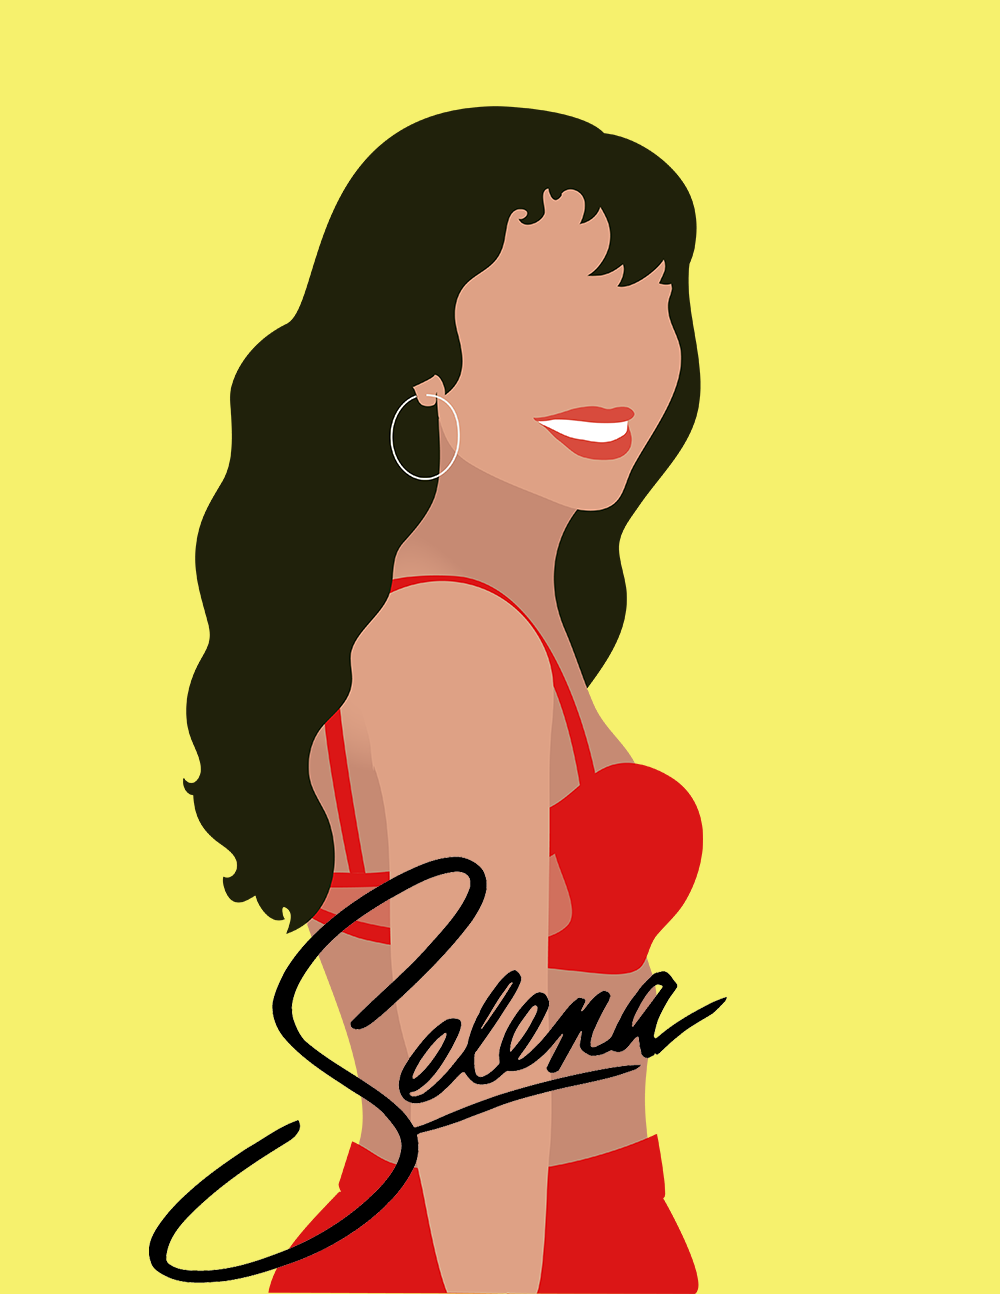 Selena's legacy lives on 24 years after her death | The Baylor Lariat